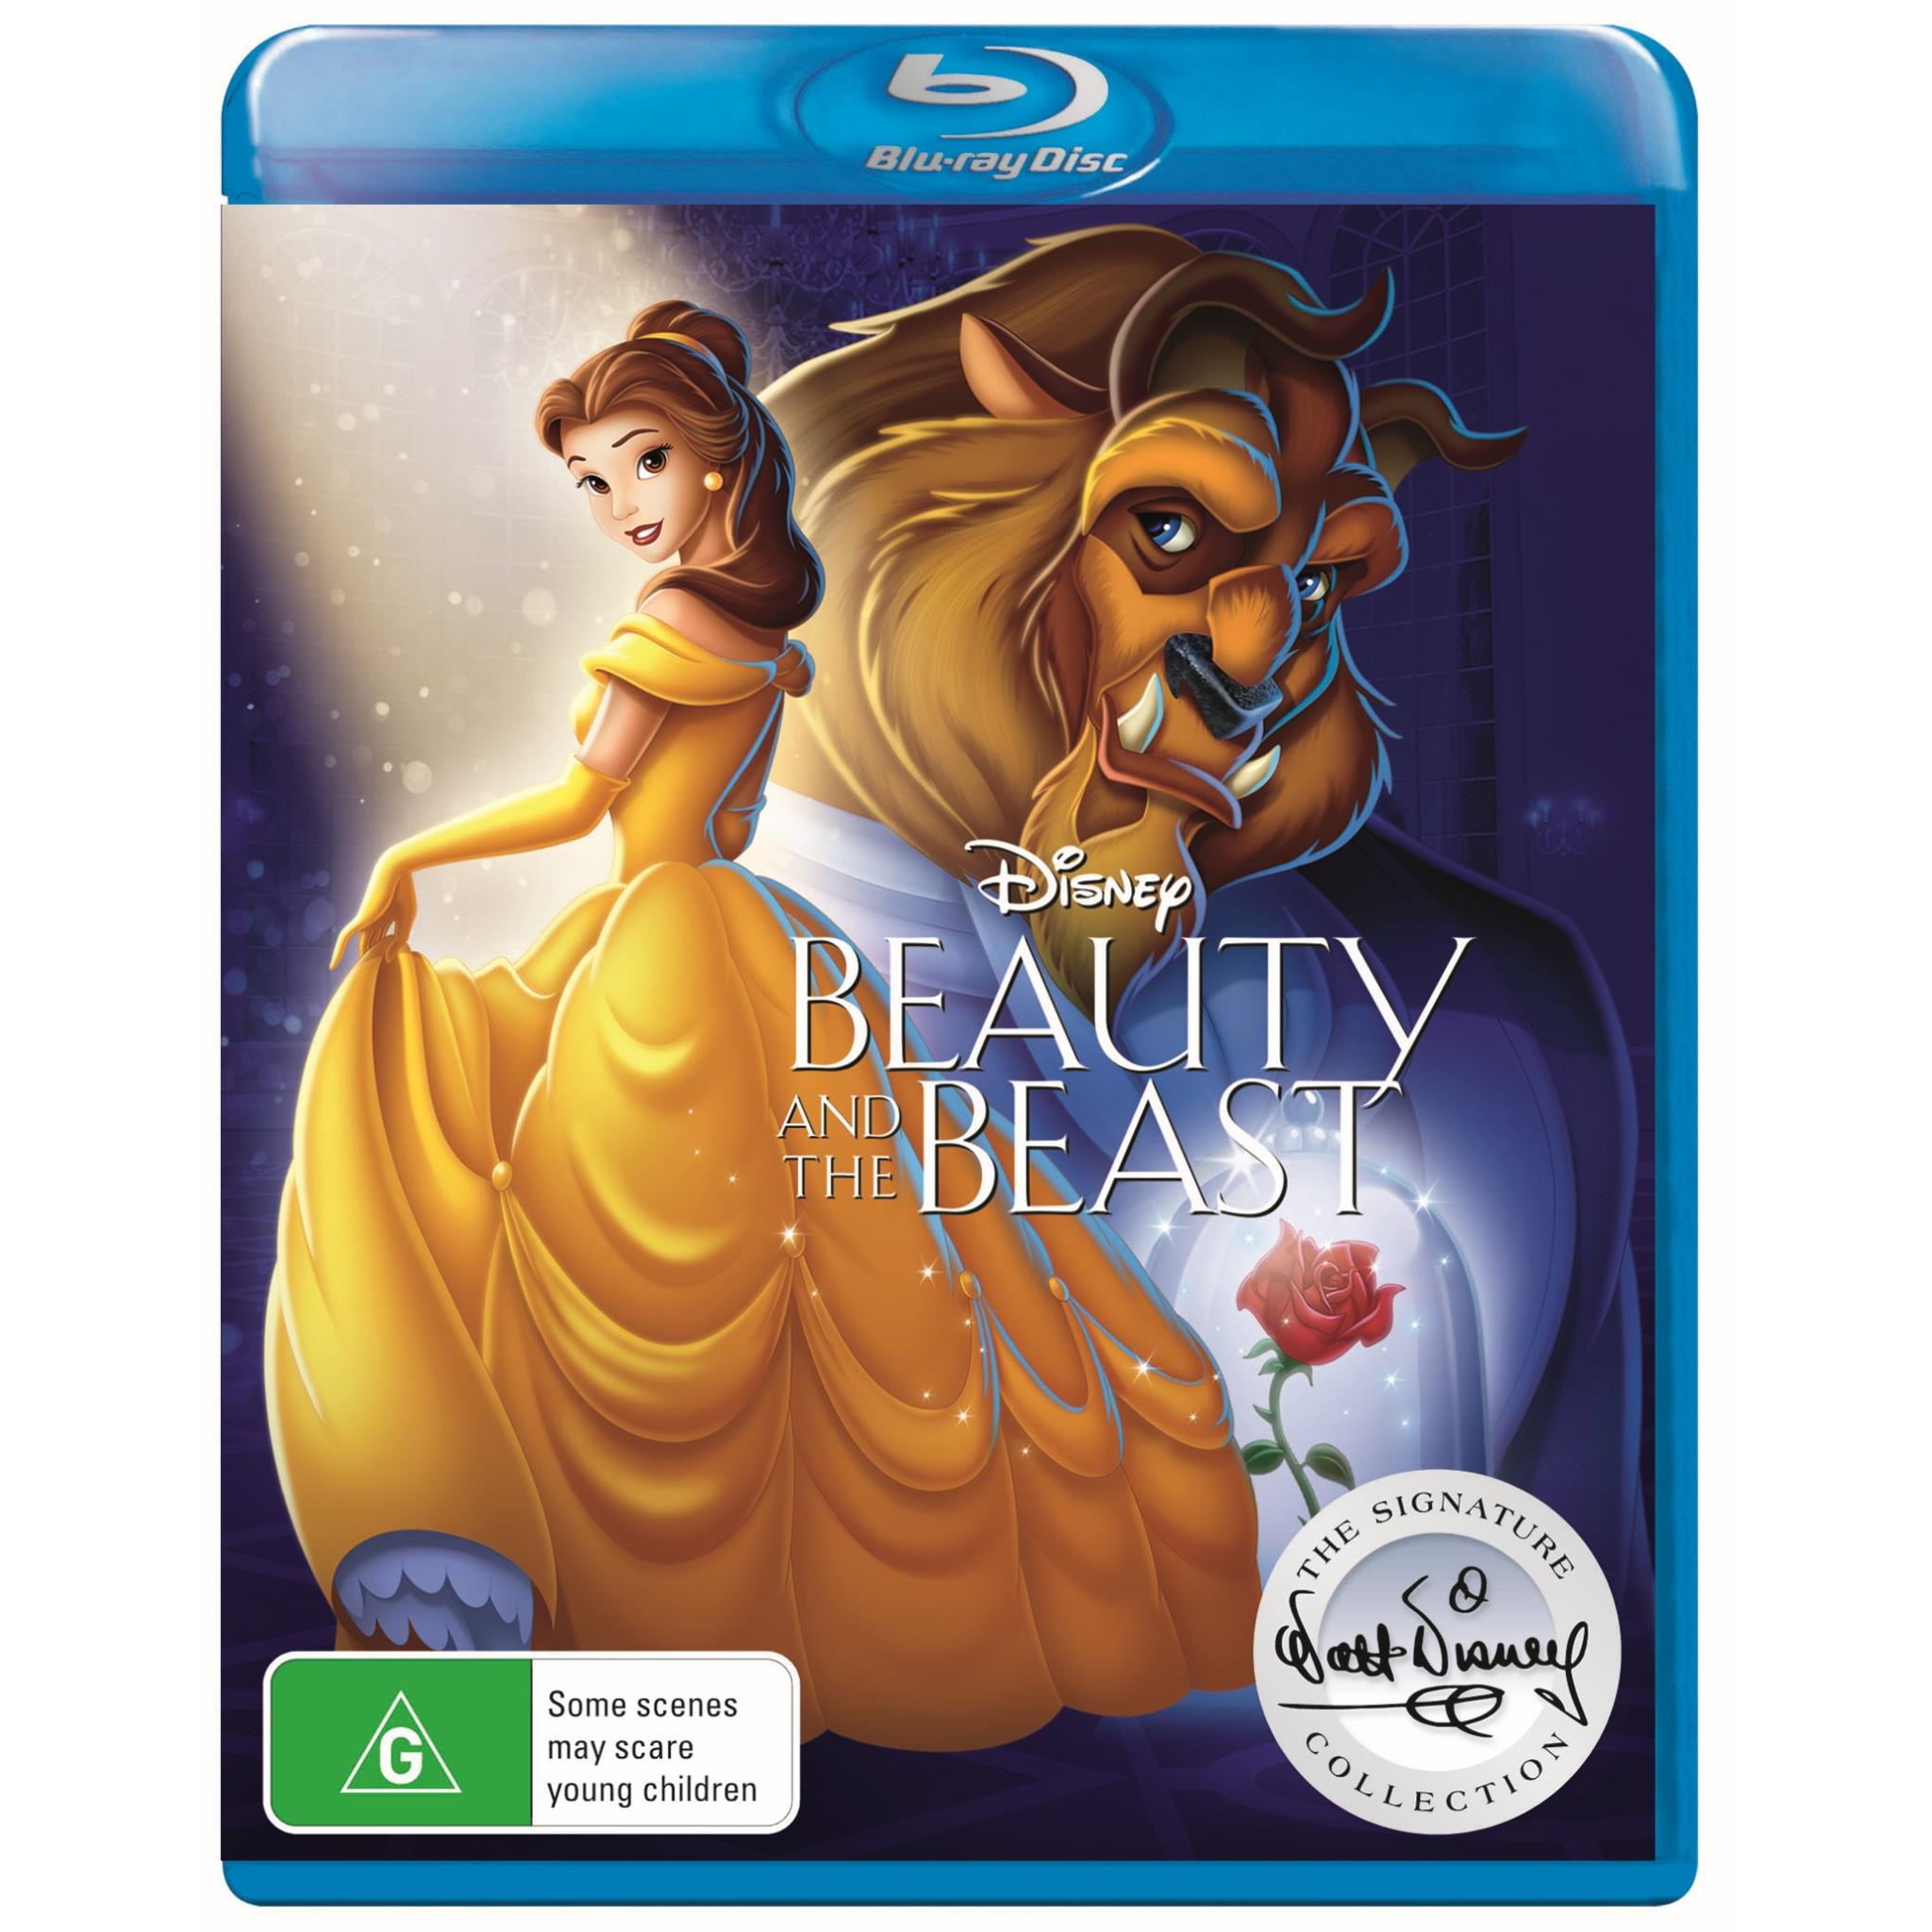 Lady And The Tramp Signature Collection (blu-ray + Dvd + Digital) : Target